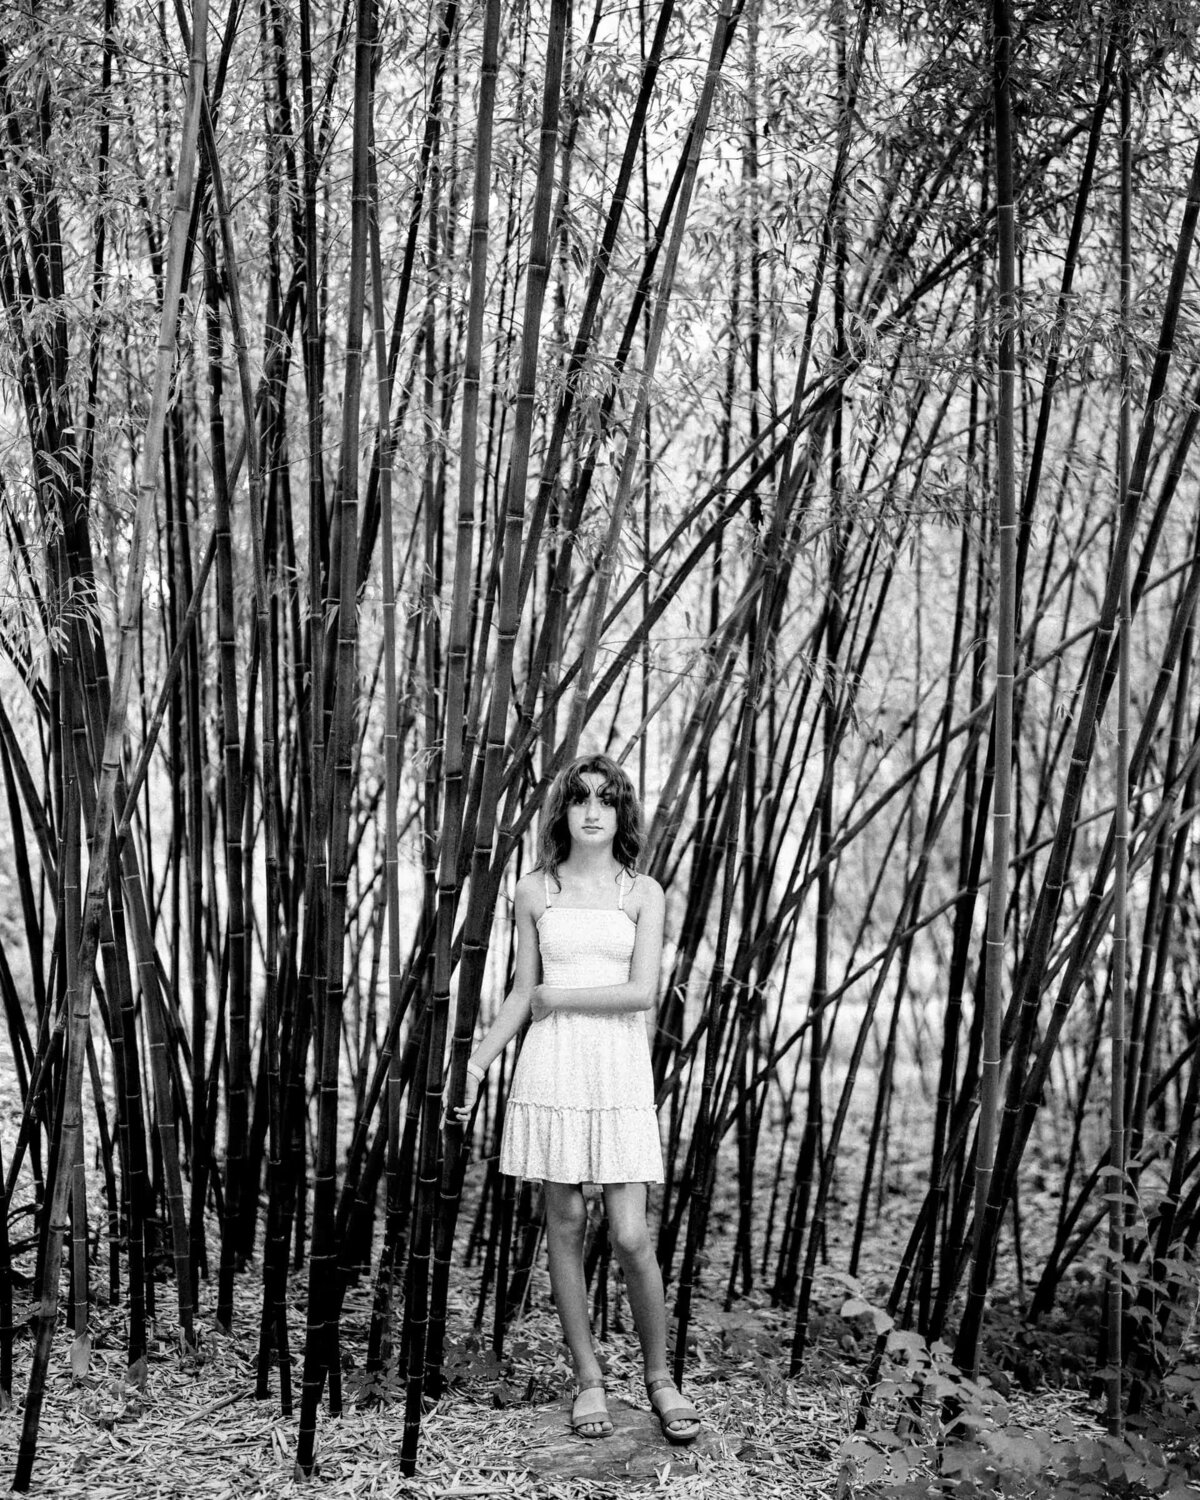 A girl standing in a small area with skinny trees around.